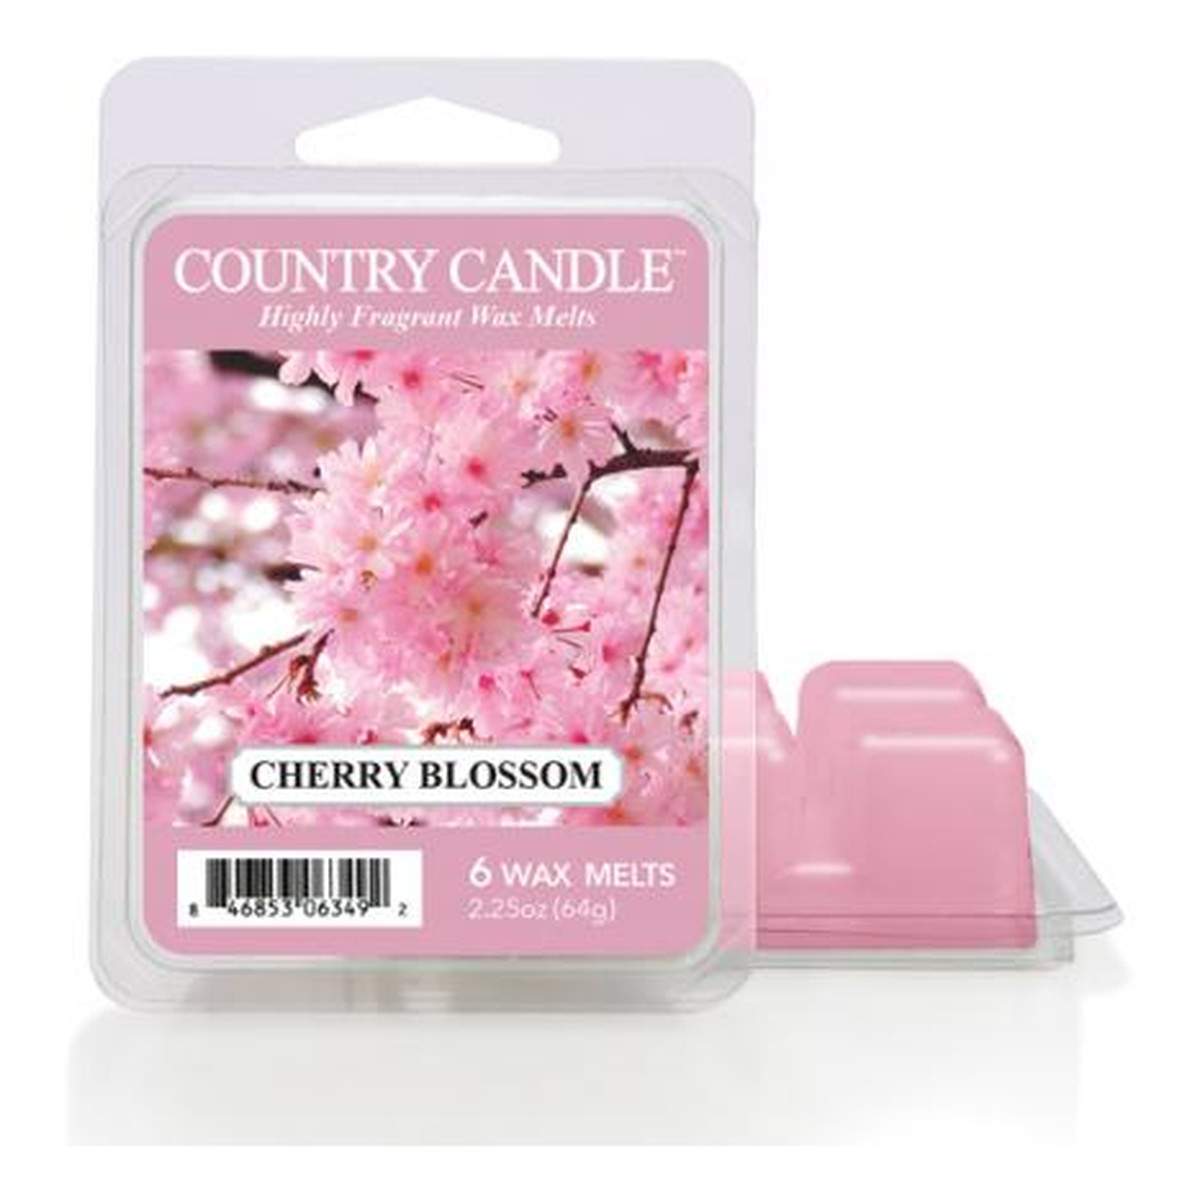 Country Candle Wax wosk zapachowy "potpourri" cherry blossom 64g